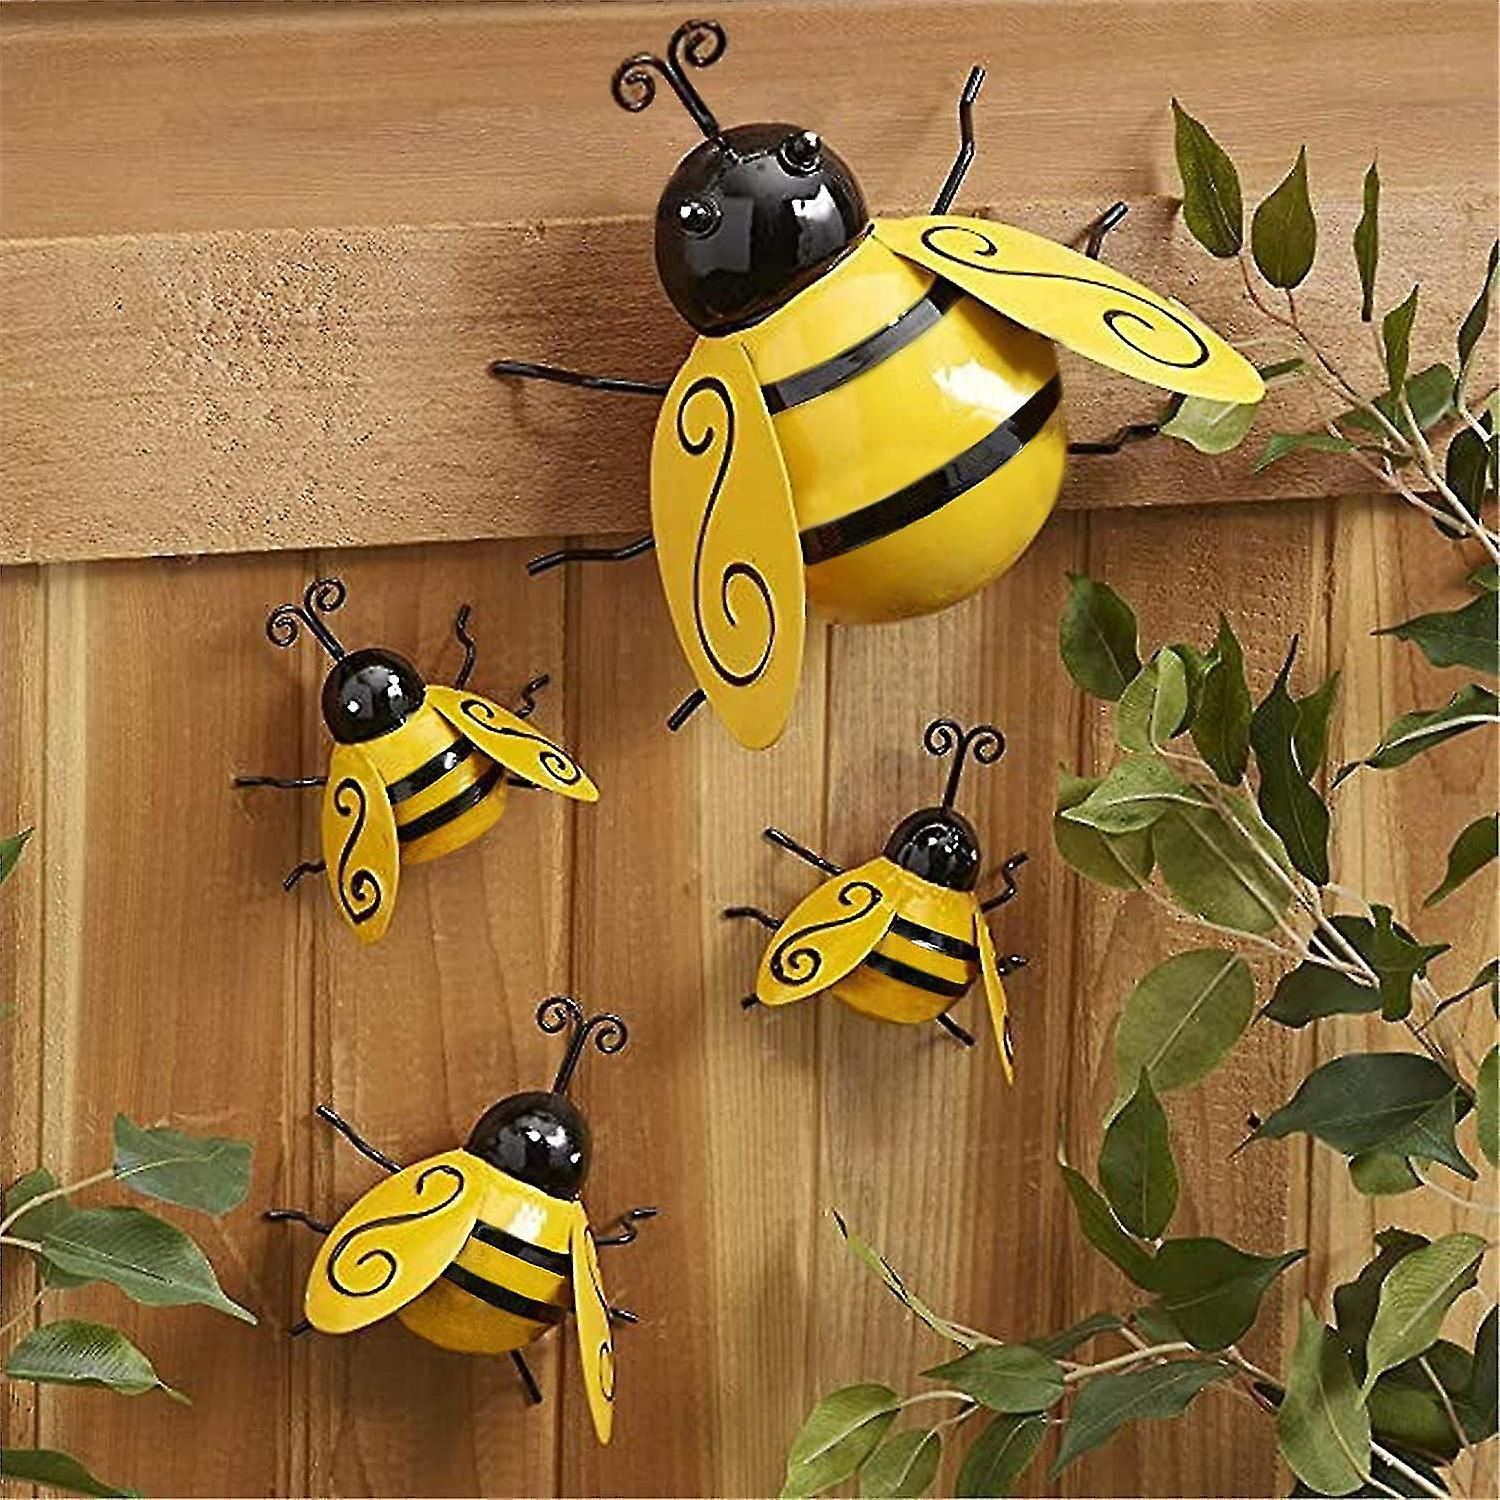 4 Pcs Metal Bumble Bee Decorations, Wall Art Bee 3d Sculpture Ornament,  Bumble Bee Metal Garden Ornaments | Fruugo Fr Within Current Bee Ornament Wall Art (Gallery 1 of 20)